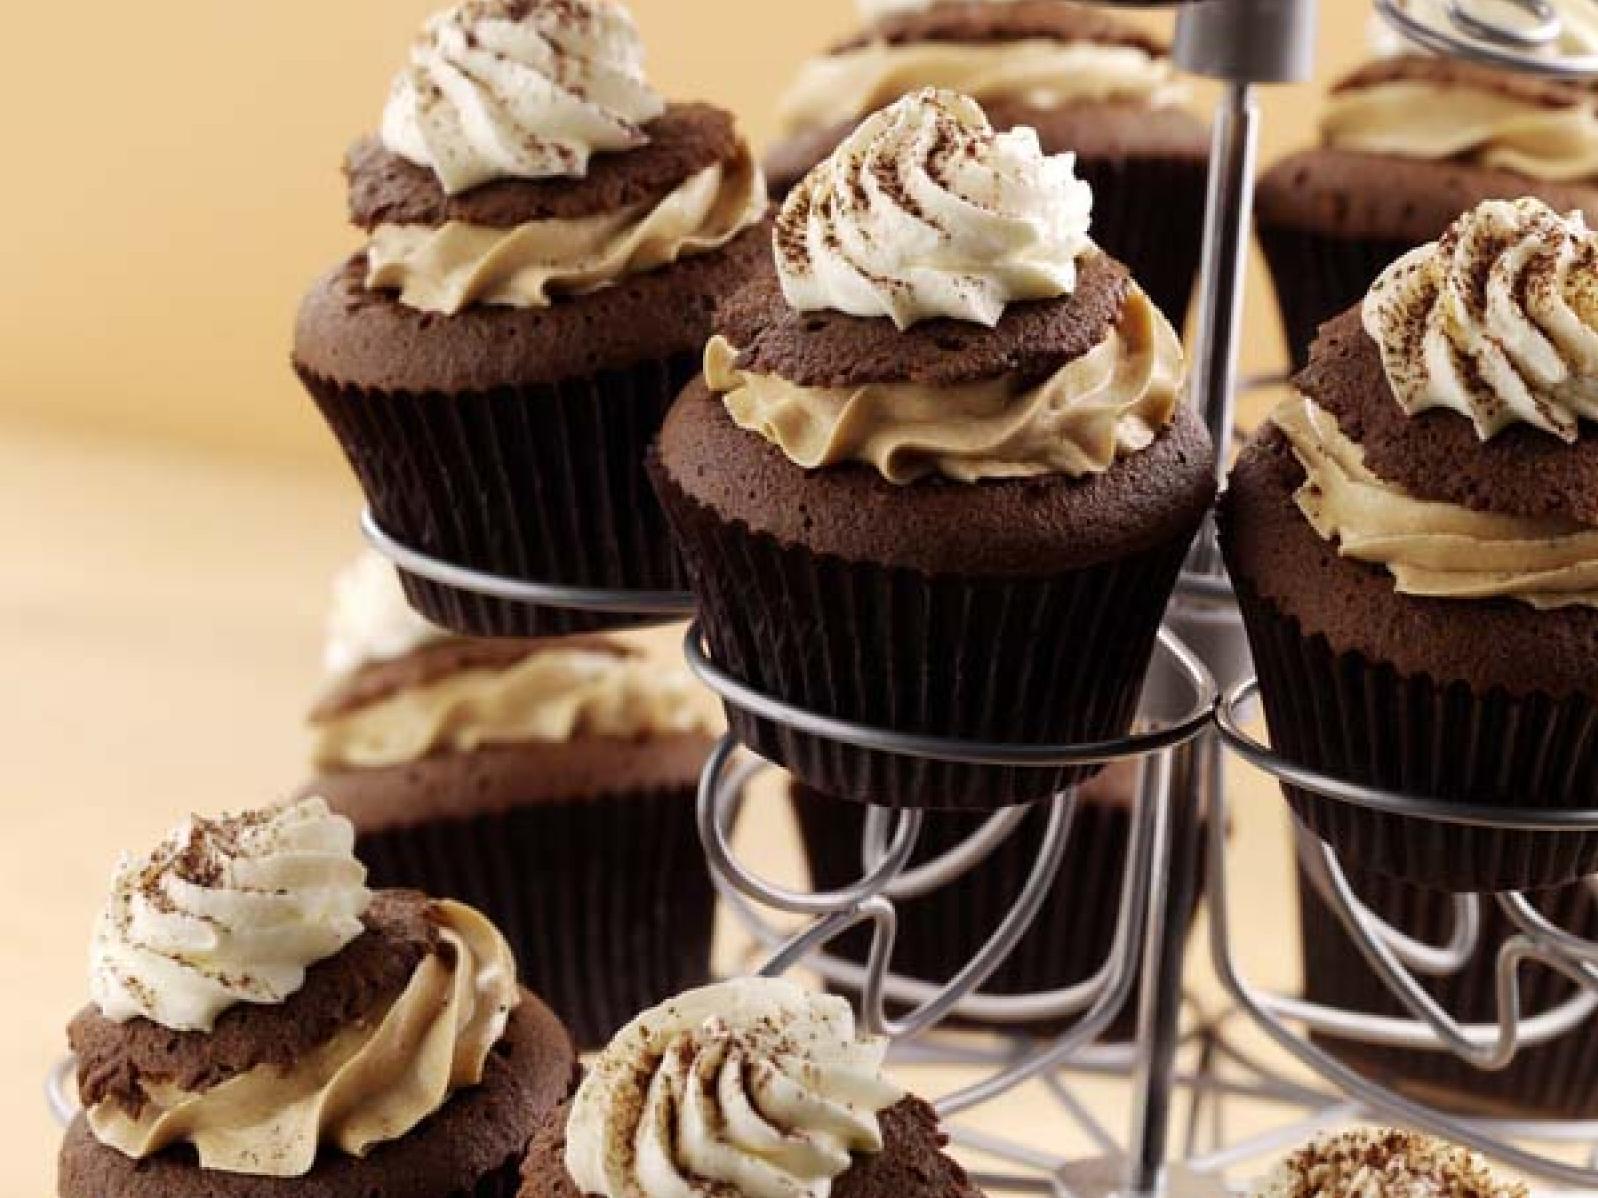  The perfect pick-me-up, in cupcake form